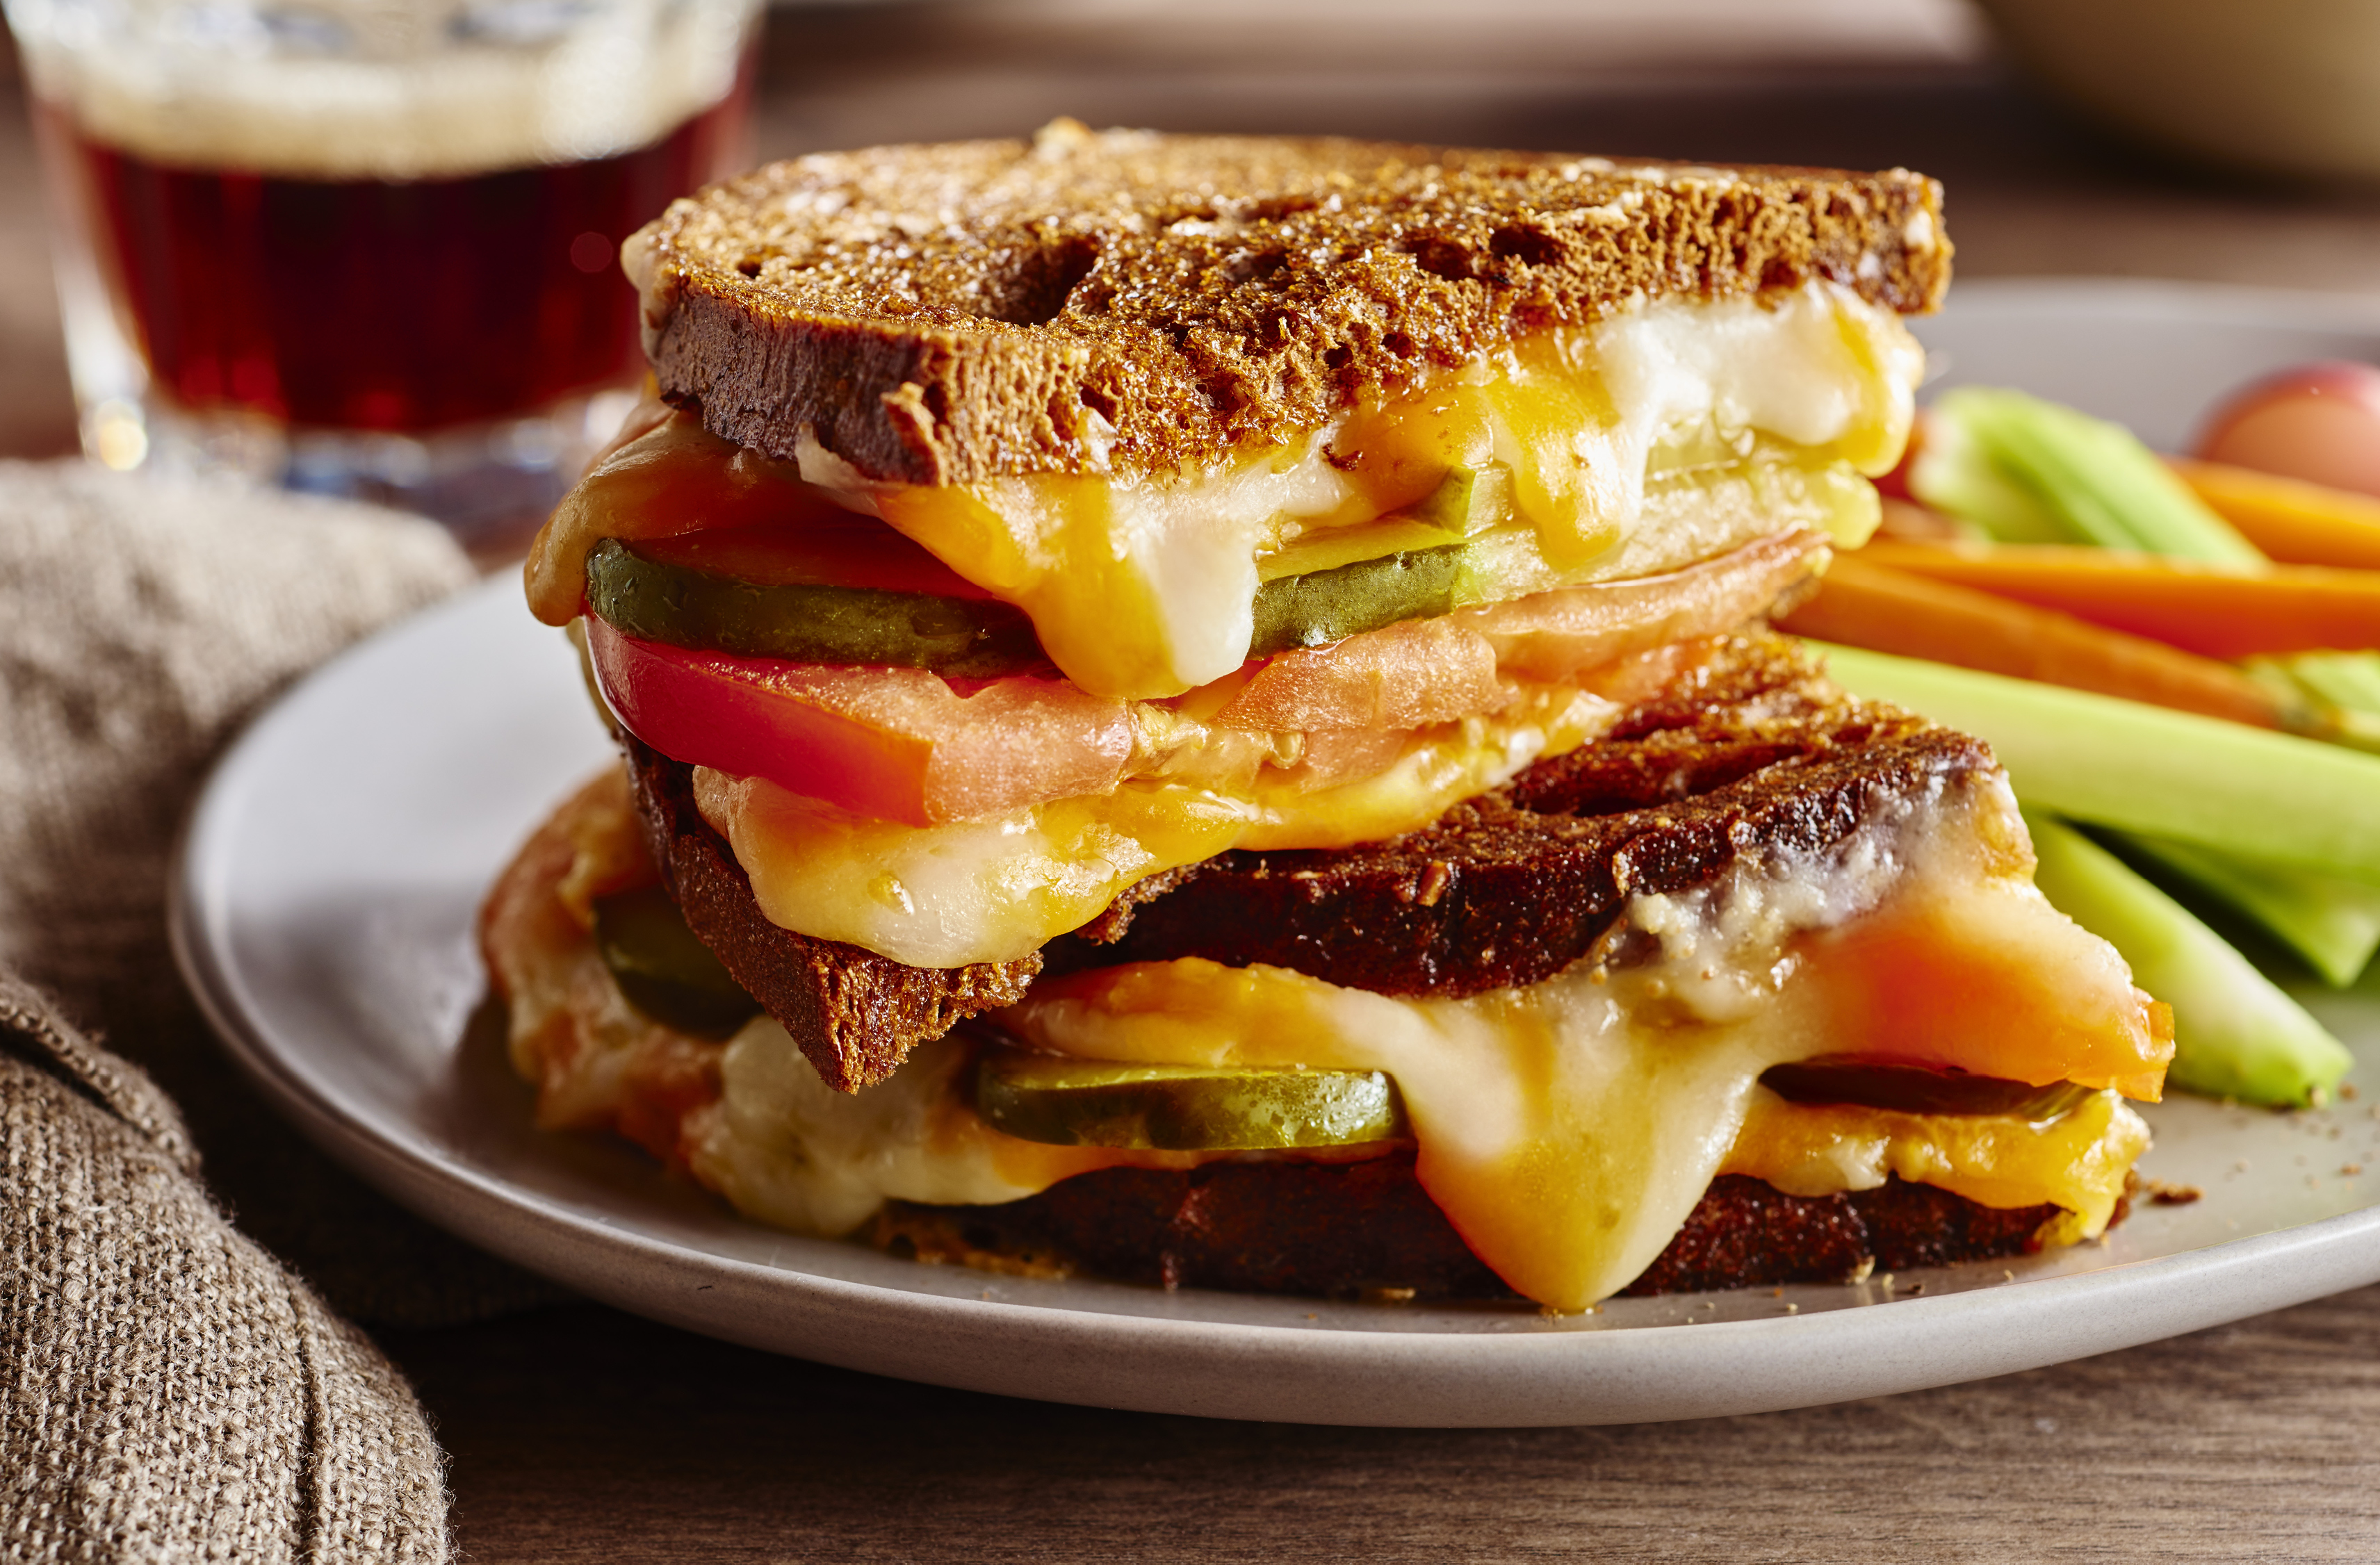 A double decker rye bread sandwich filled with melted lactose-free cheese and vegetables
